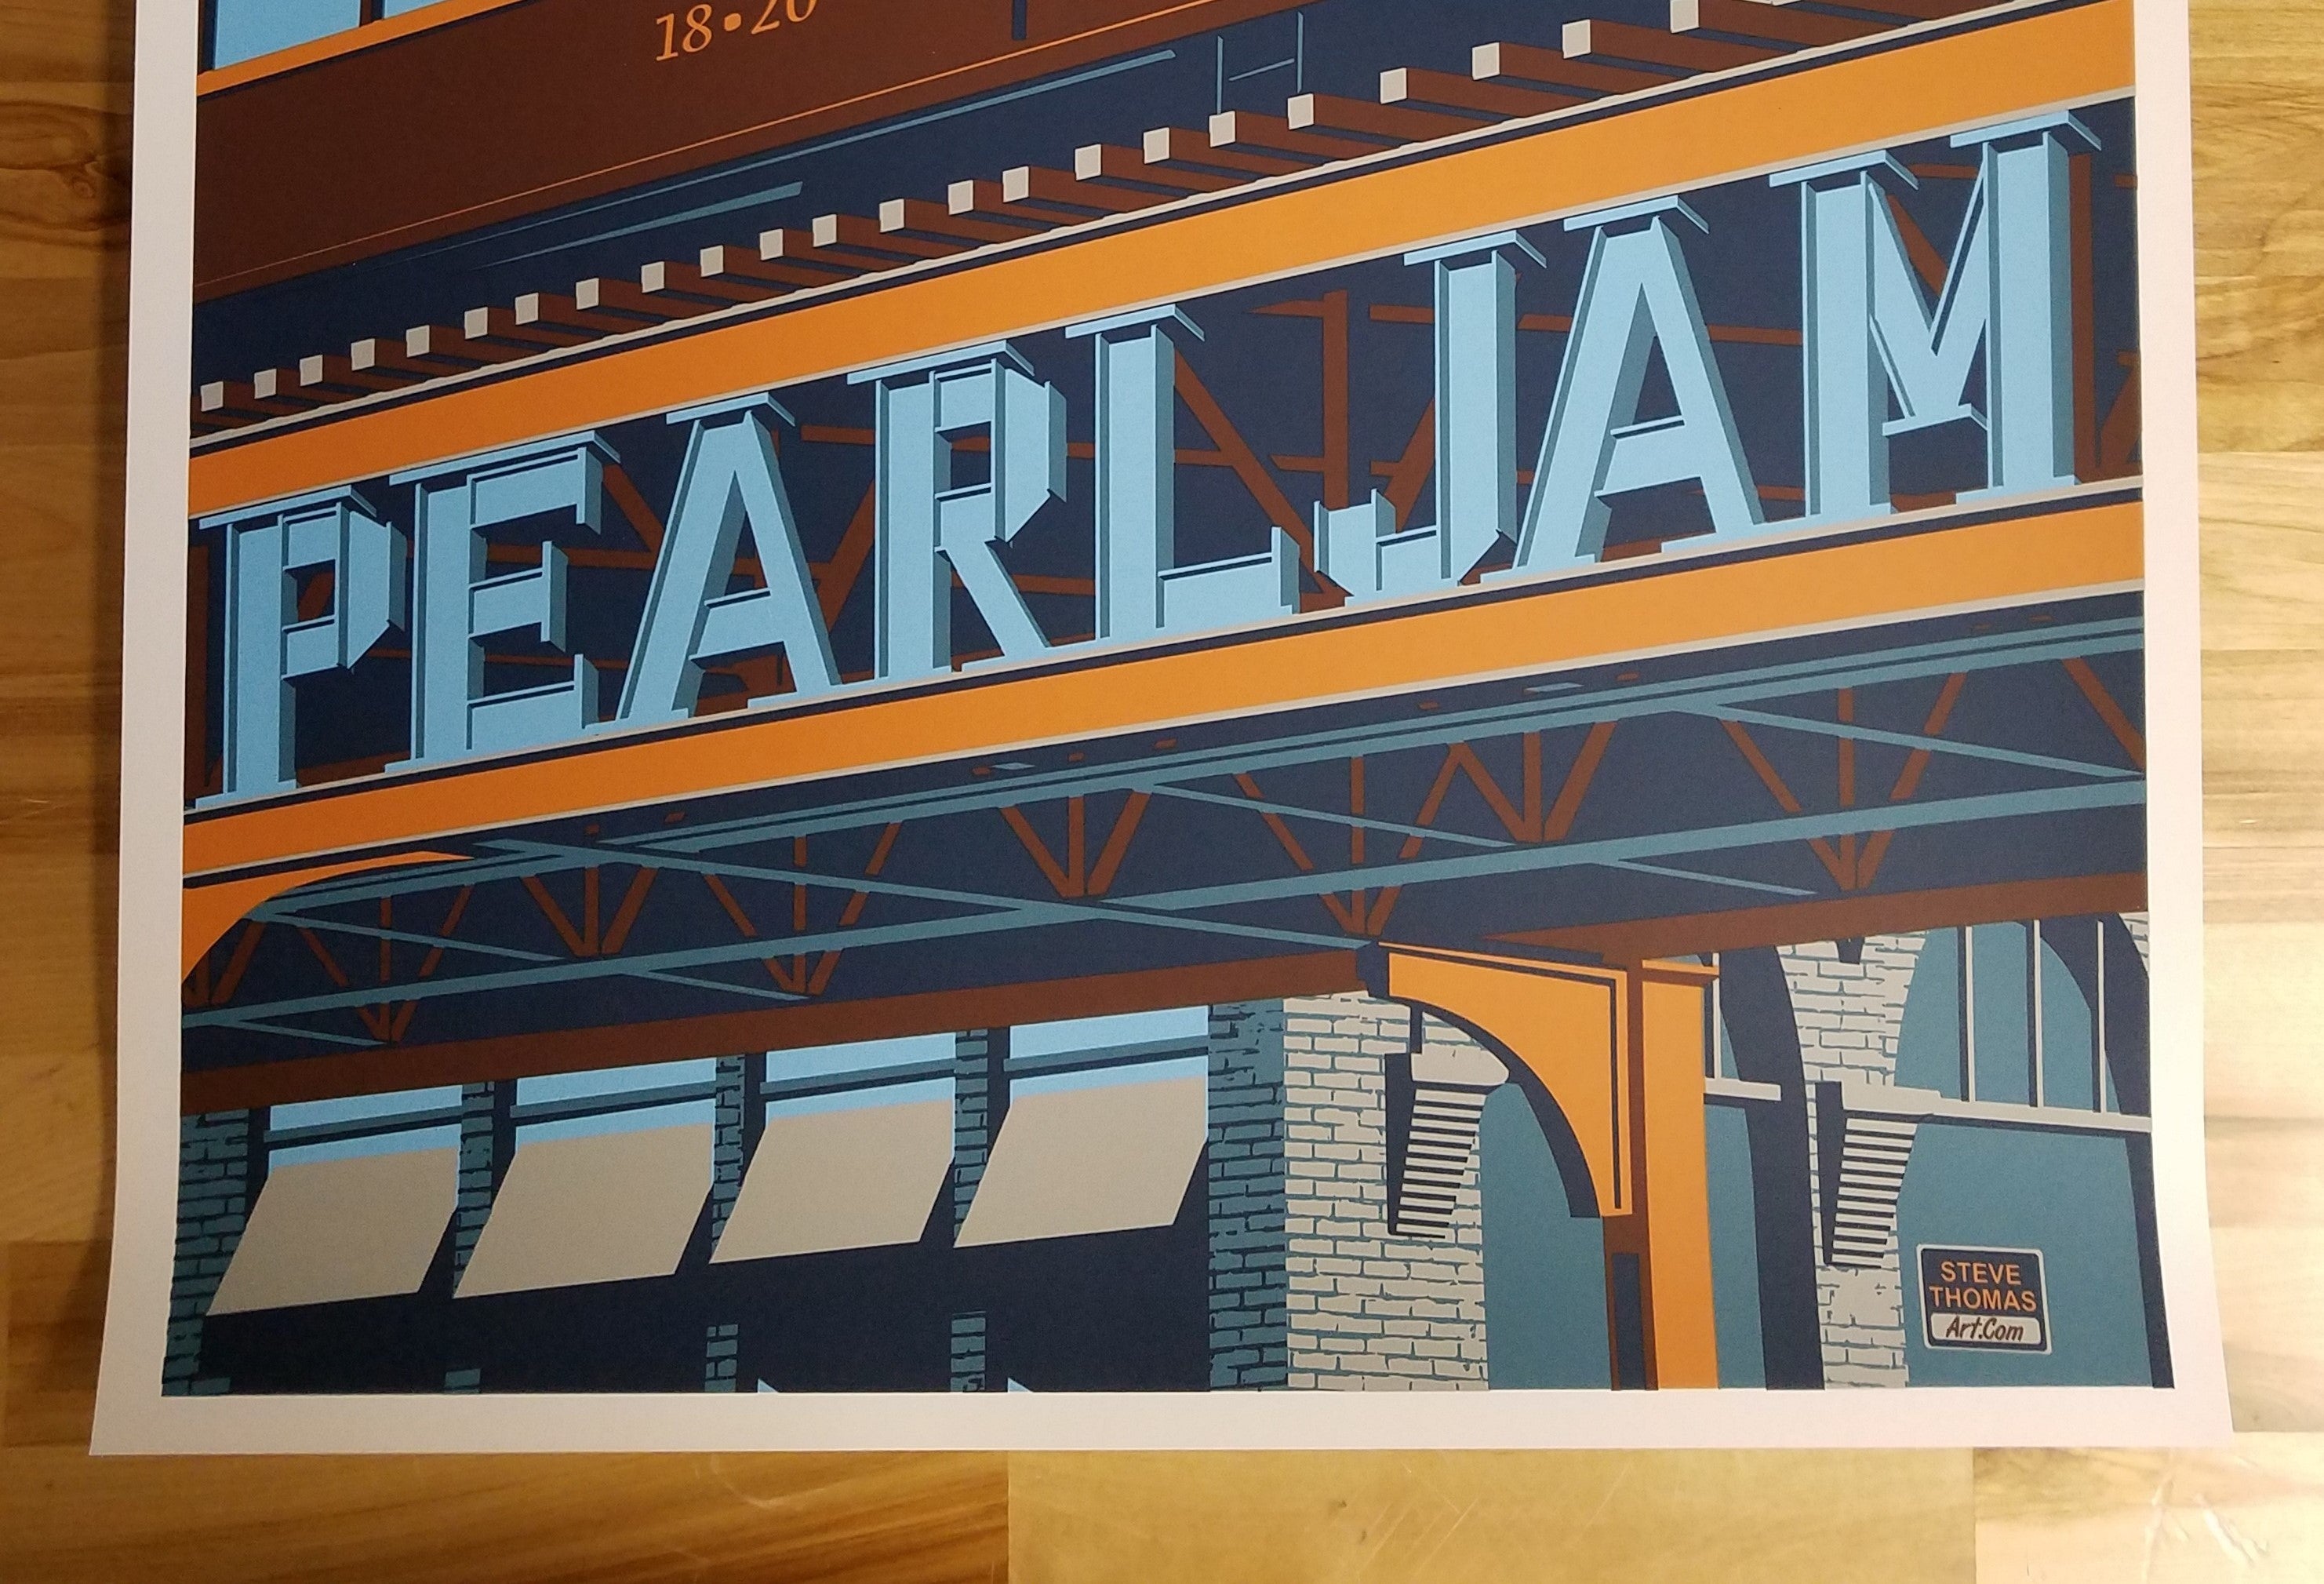 Title: Pearl Jam Wrigley Field (August 18th and 20th, 2018)  Artist: Steve Thomas  Edition: Official Merch Tent Poster, unsigned and unnumbered  Type: Screen print poster  Size: 18" x 24"  Location: Chicago, IL  Venue: Wrigley Field  Notes: Print is stored flat in very good condition. Released on August 16, 2018 at the Wrigley Field Merch Tent across the street from the field.